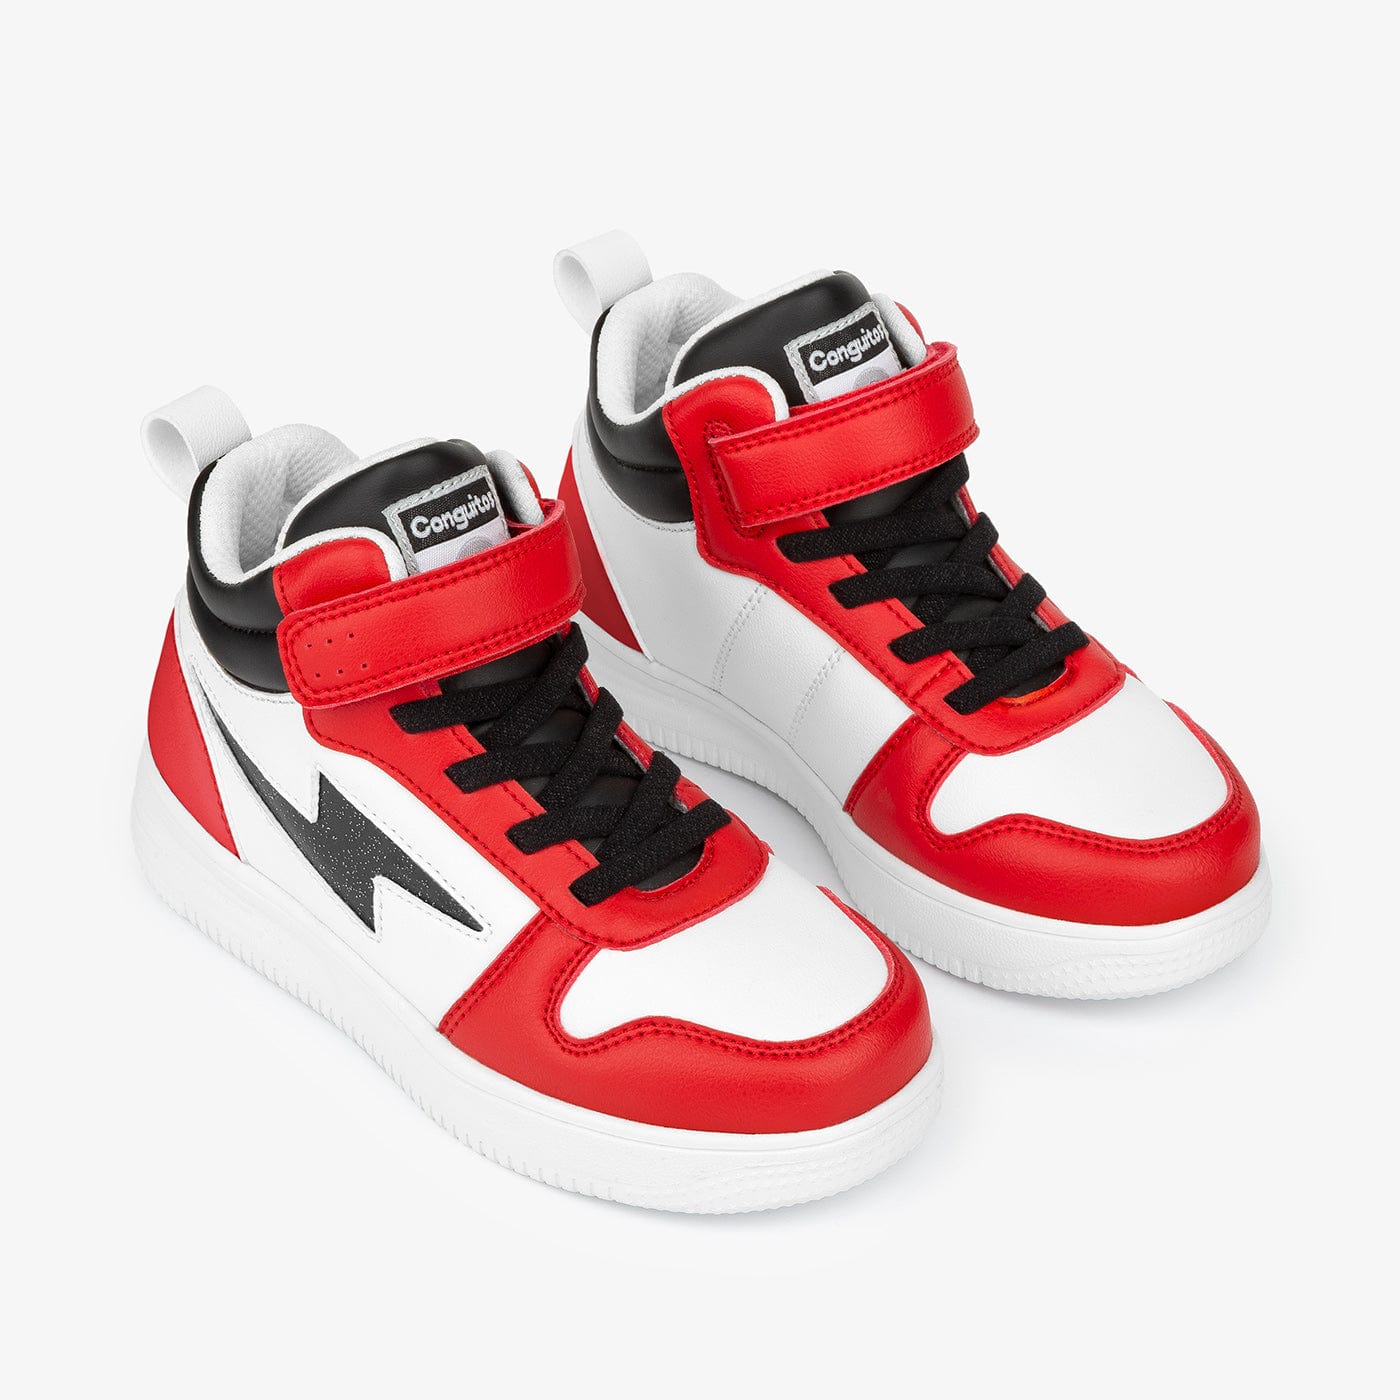 CONGUITOS Shoes Unisex Red With Lights Hi-Top Sneakers Napa